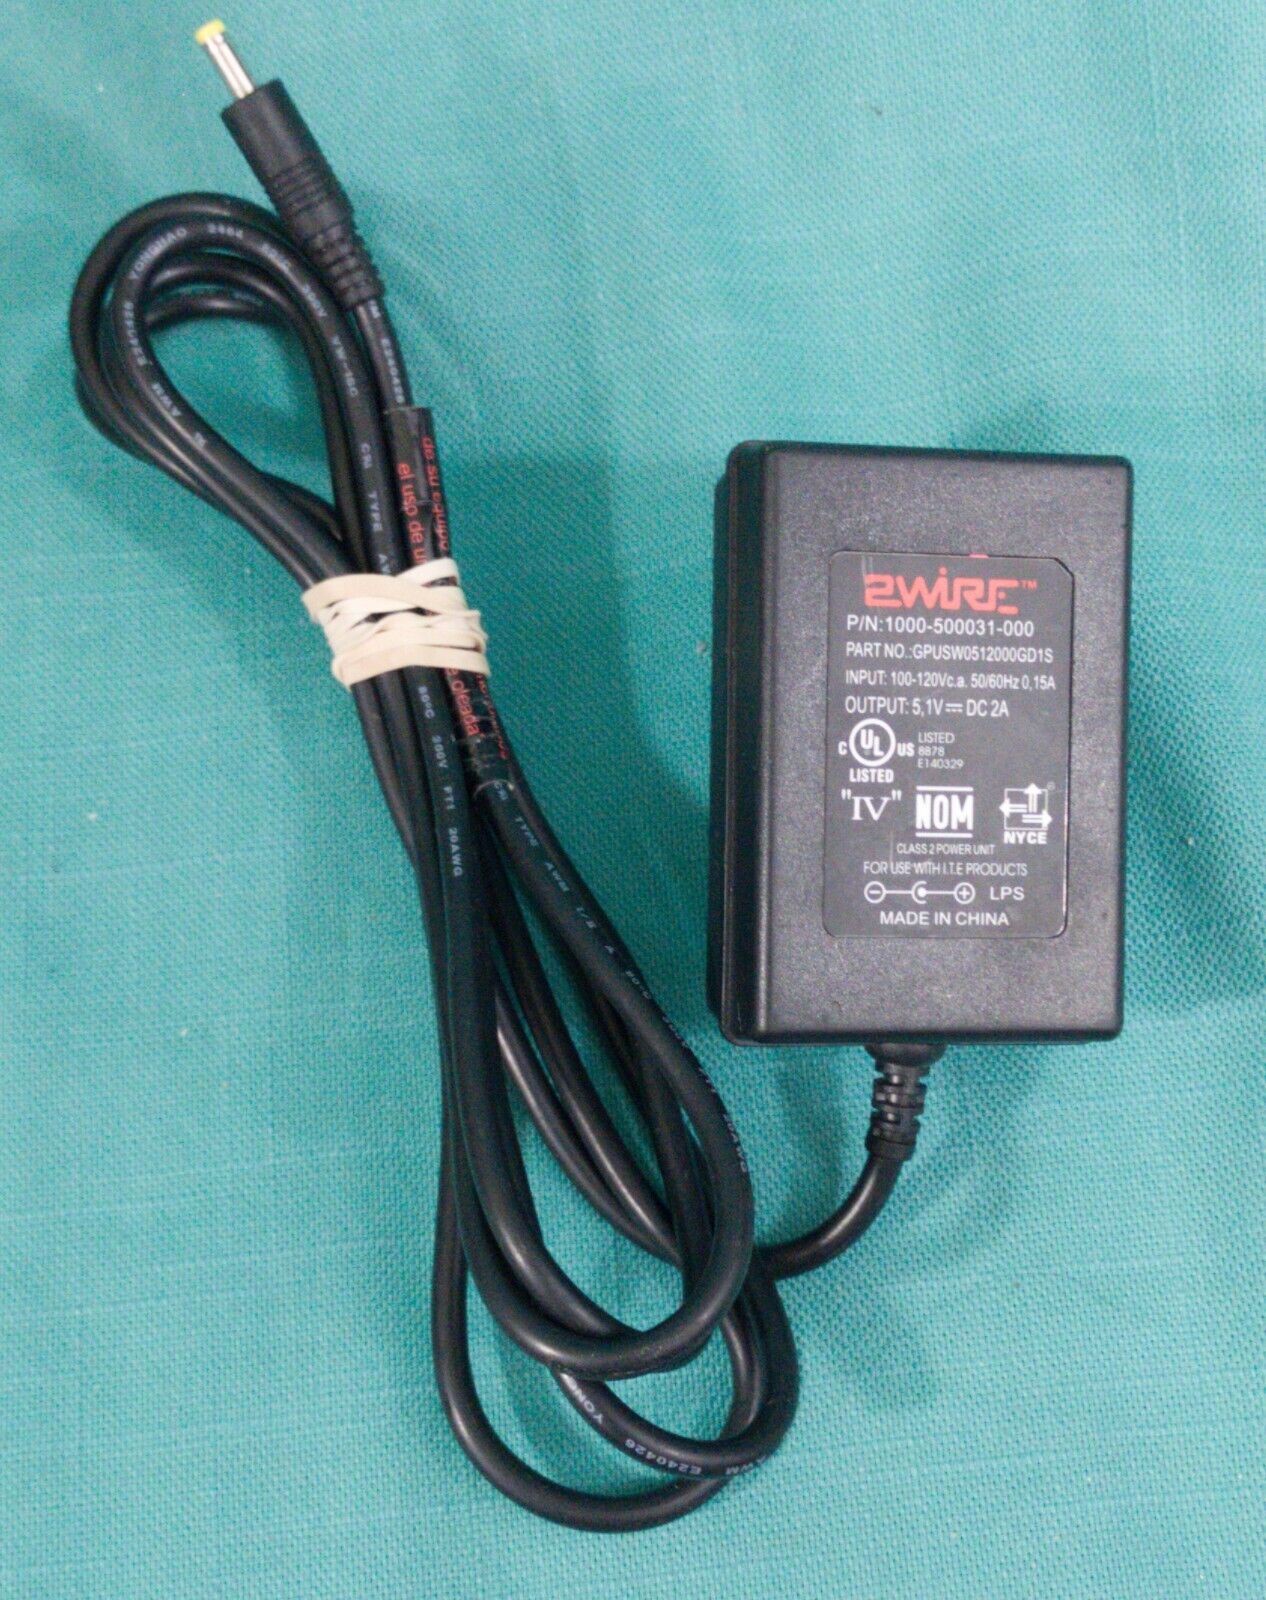 *Brand NEW*5.1V 2A AC/DC Adapter 2-Wire 1000-500031-000 Part No. GPUSW0512000GD1S Power Supply